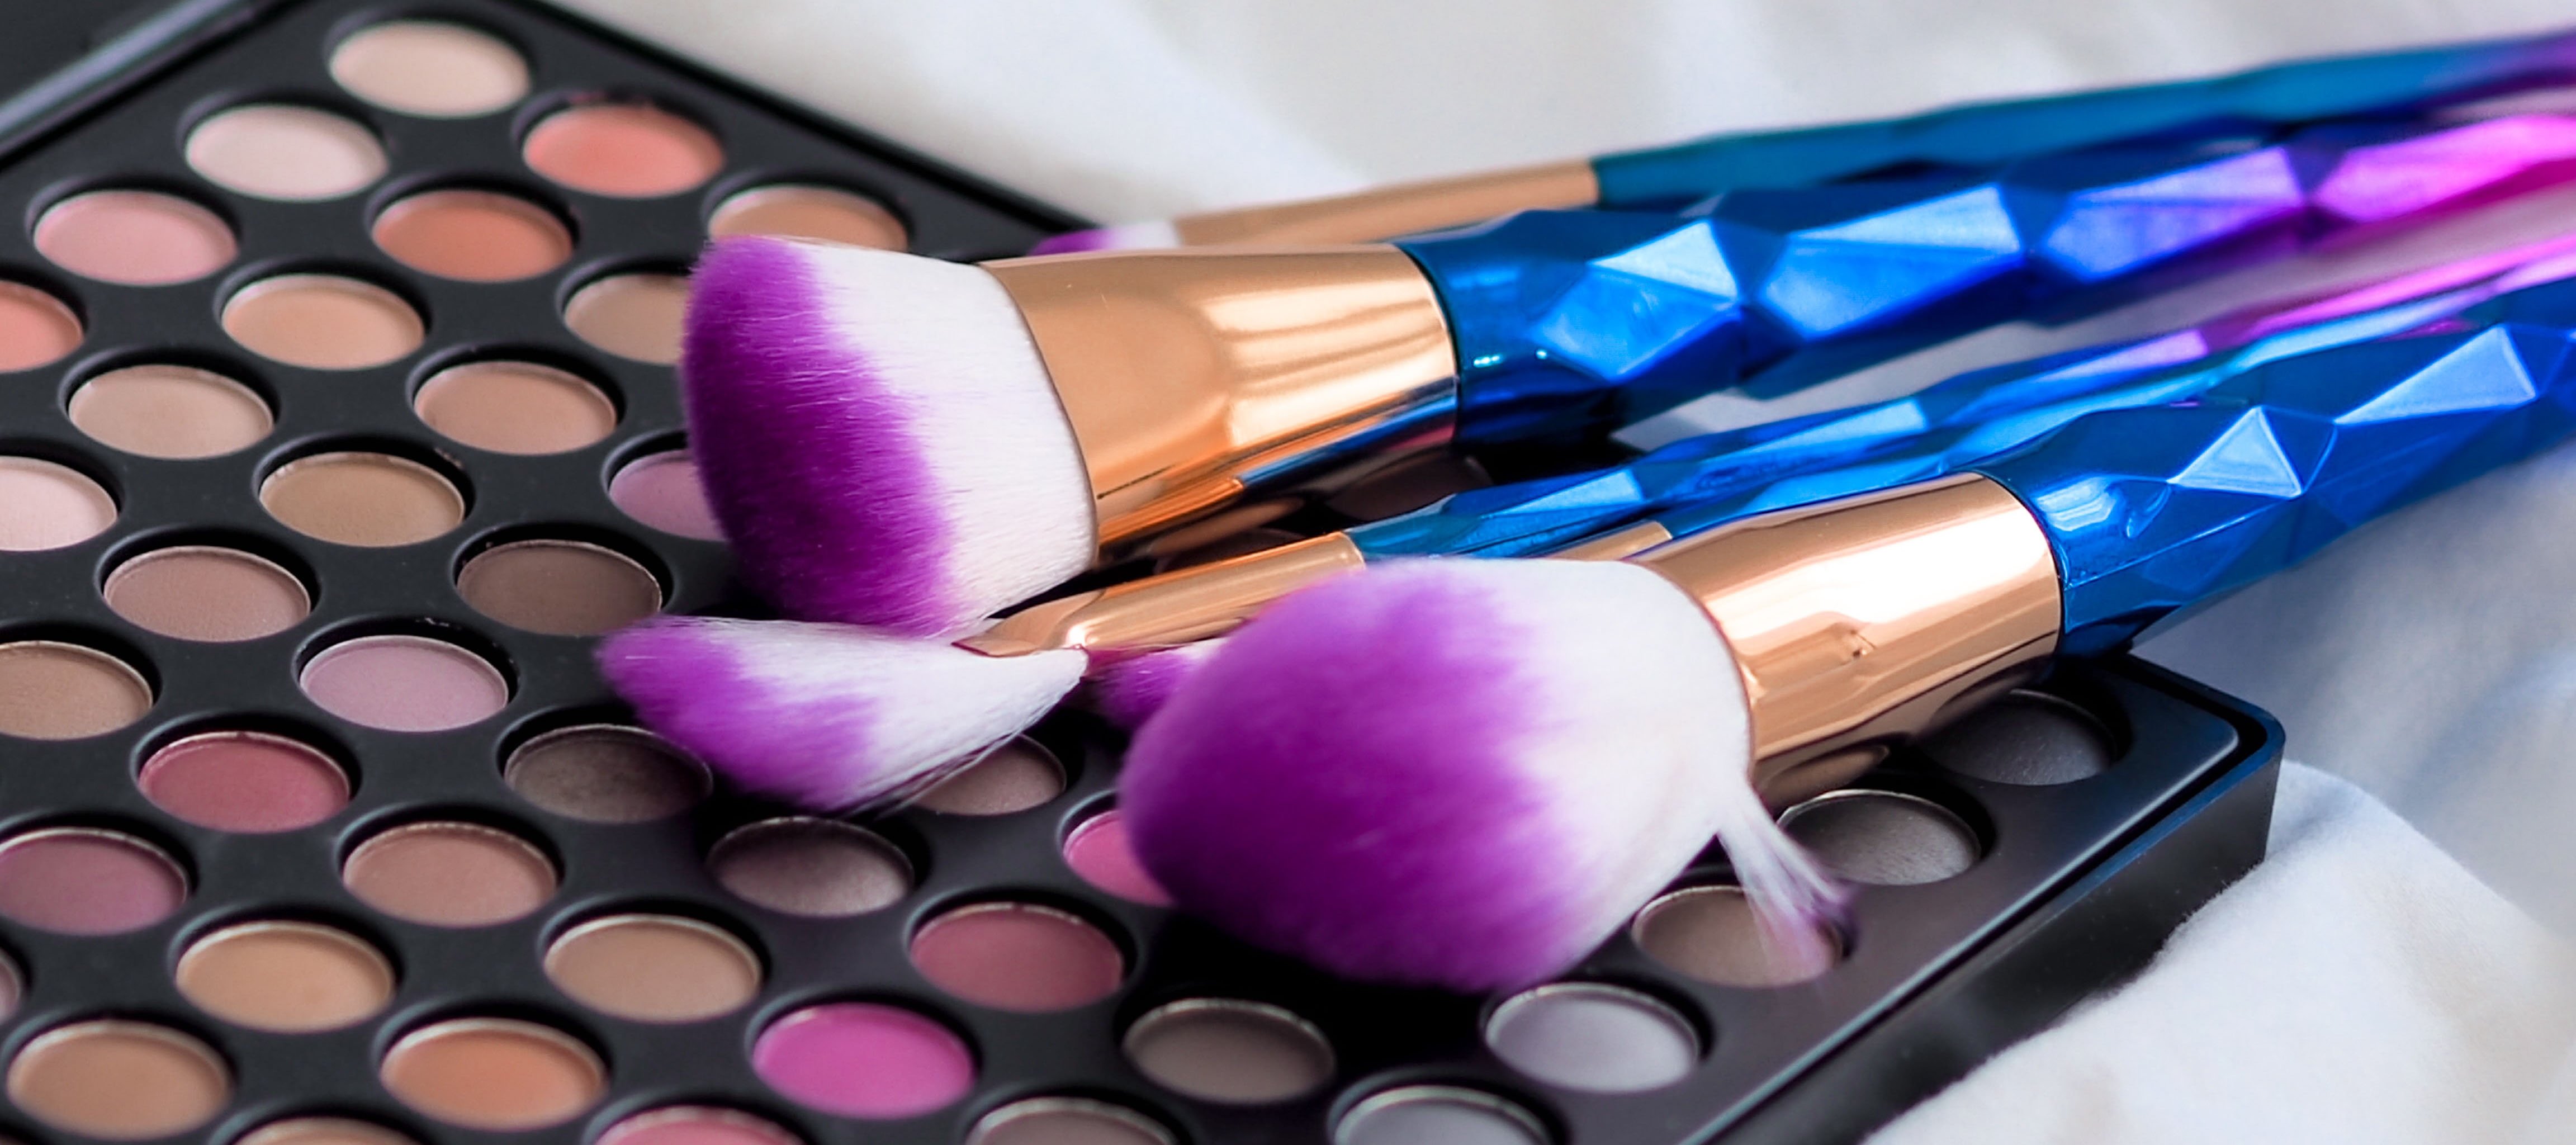 Cosmetic brushes on a colorful makeup palette.